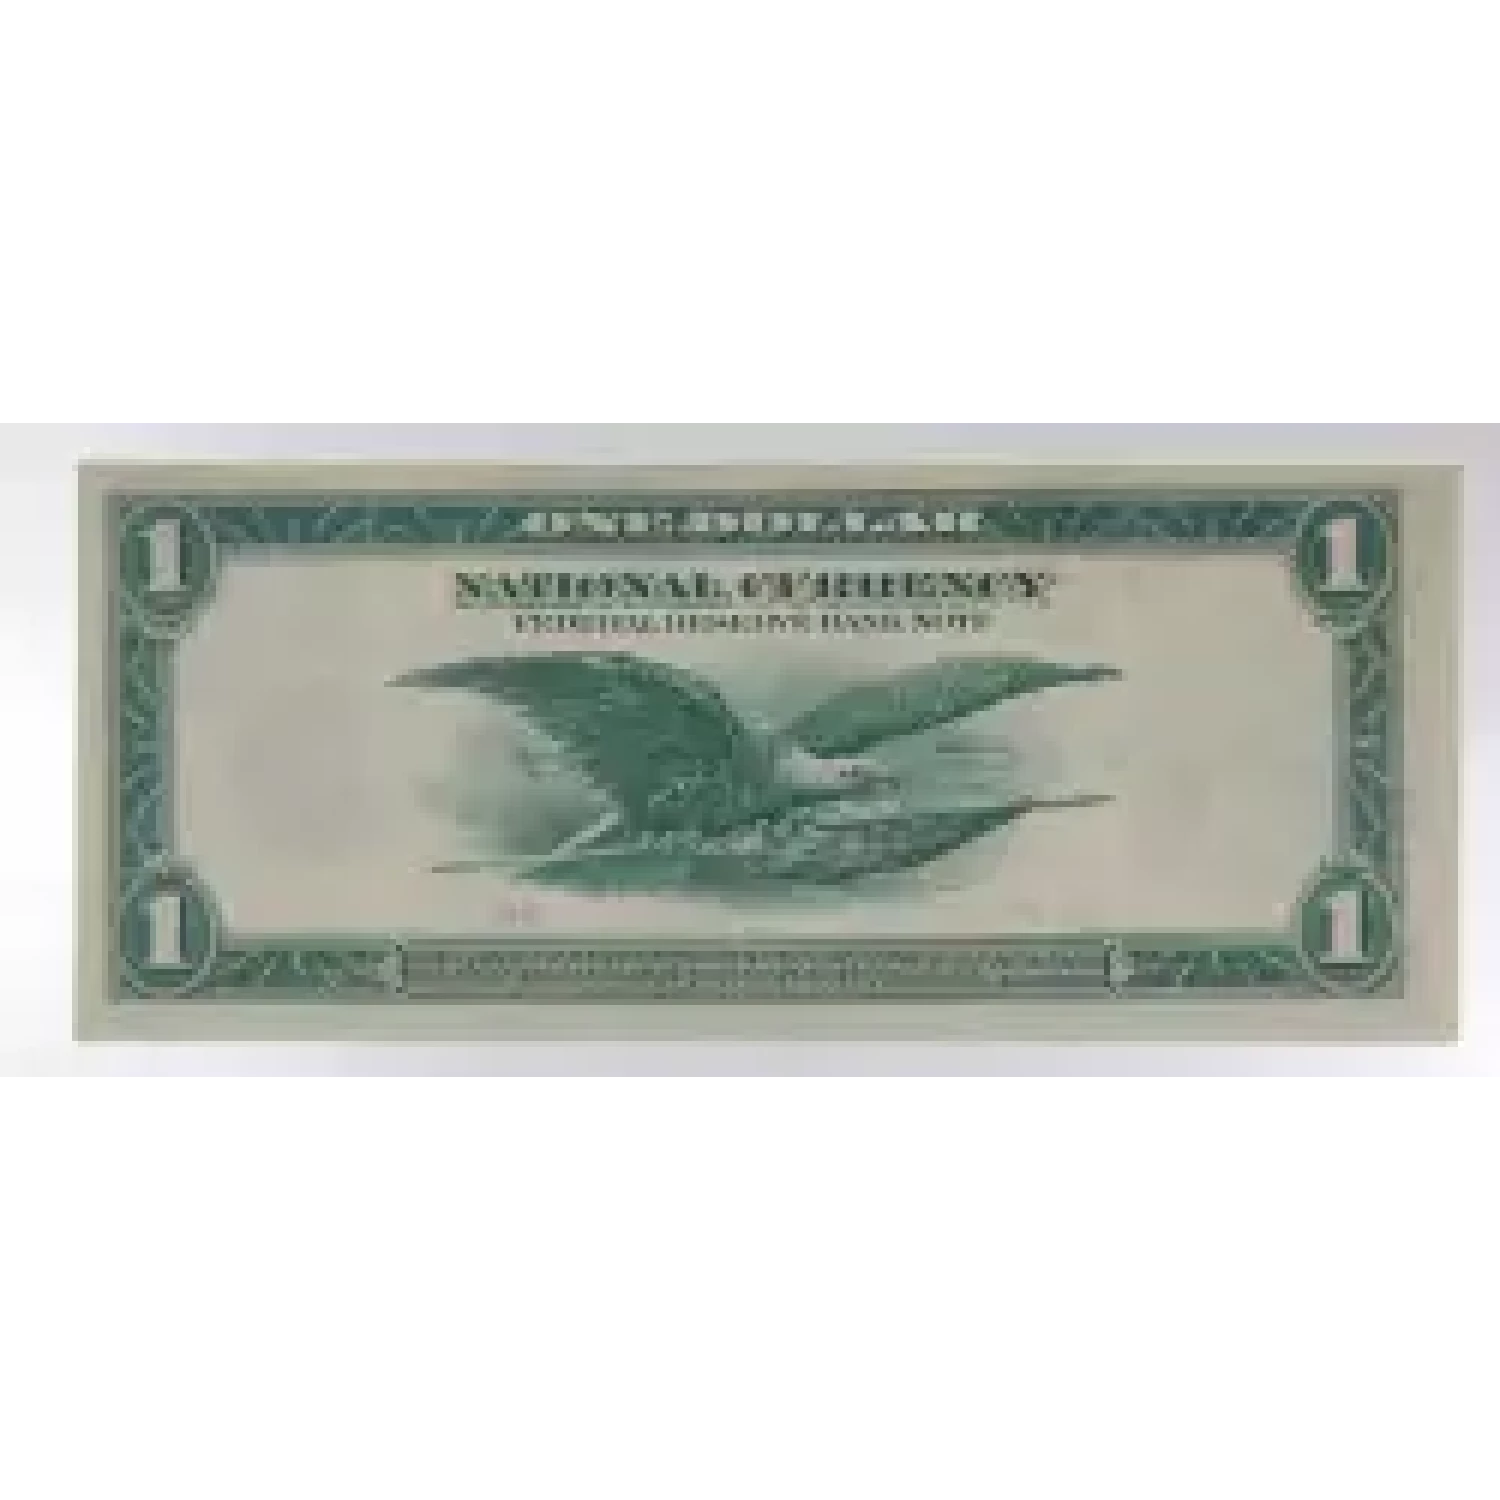 $1 1918  Federal Reserve Bank Notes 718